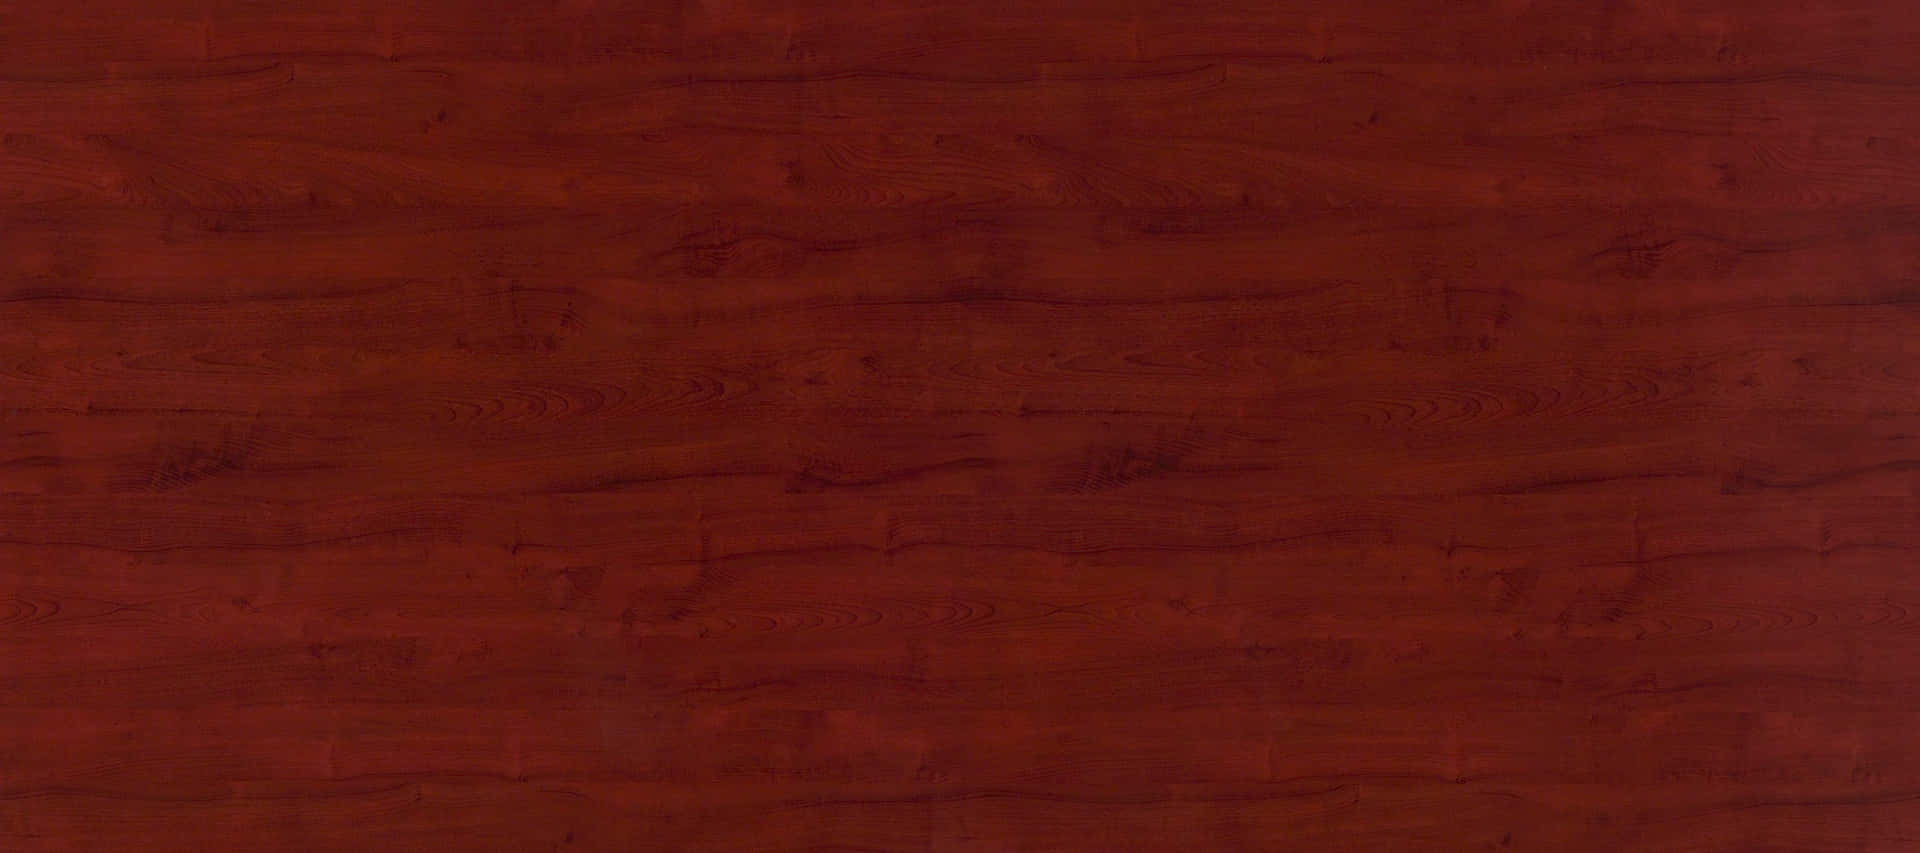 A Close Up Image Of A Red Wood Surface